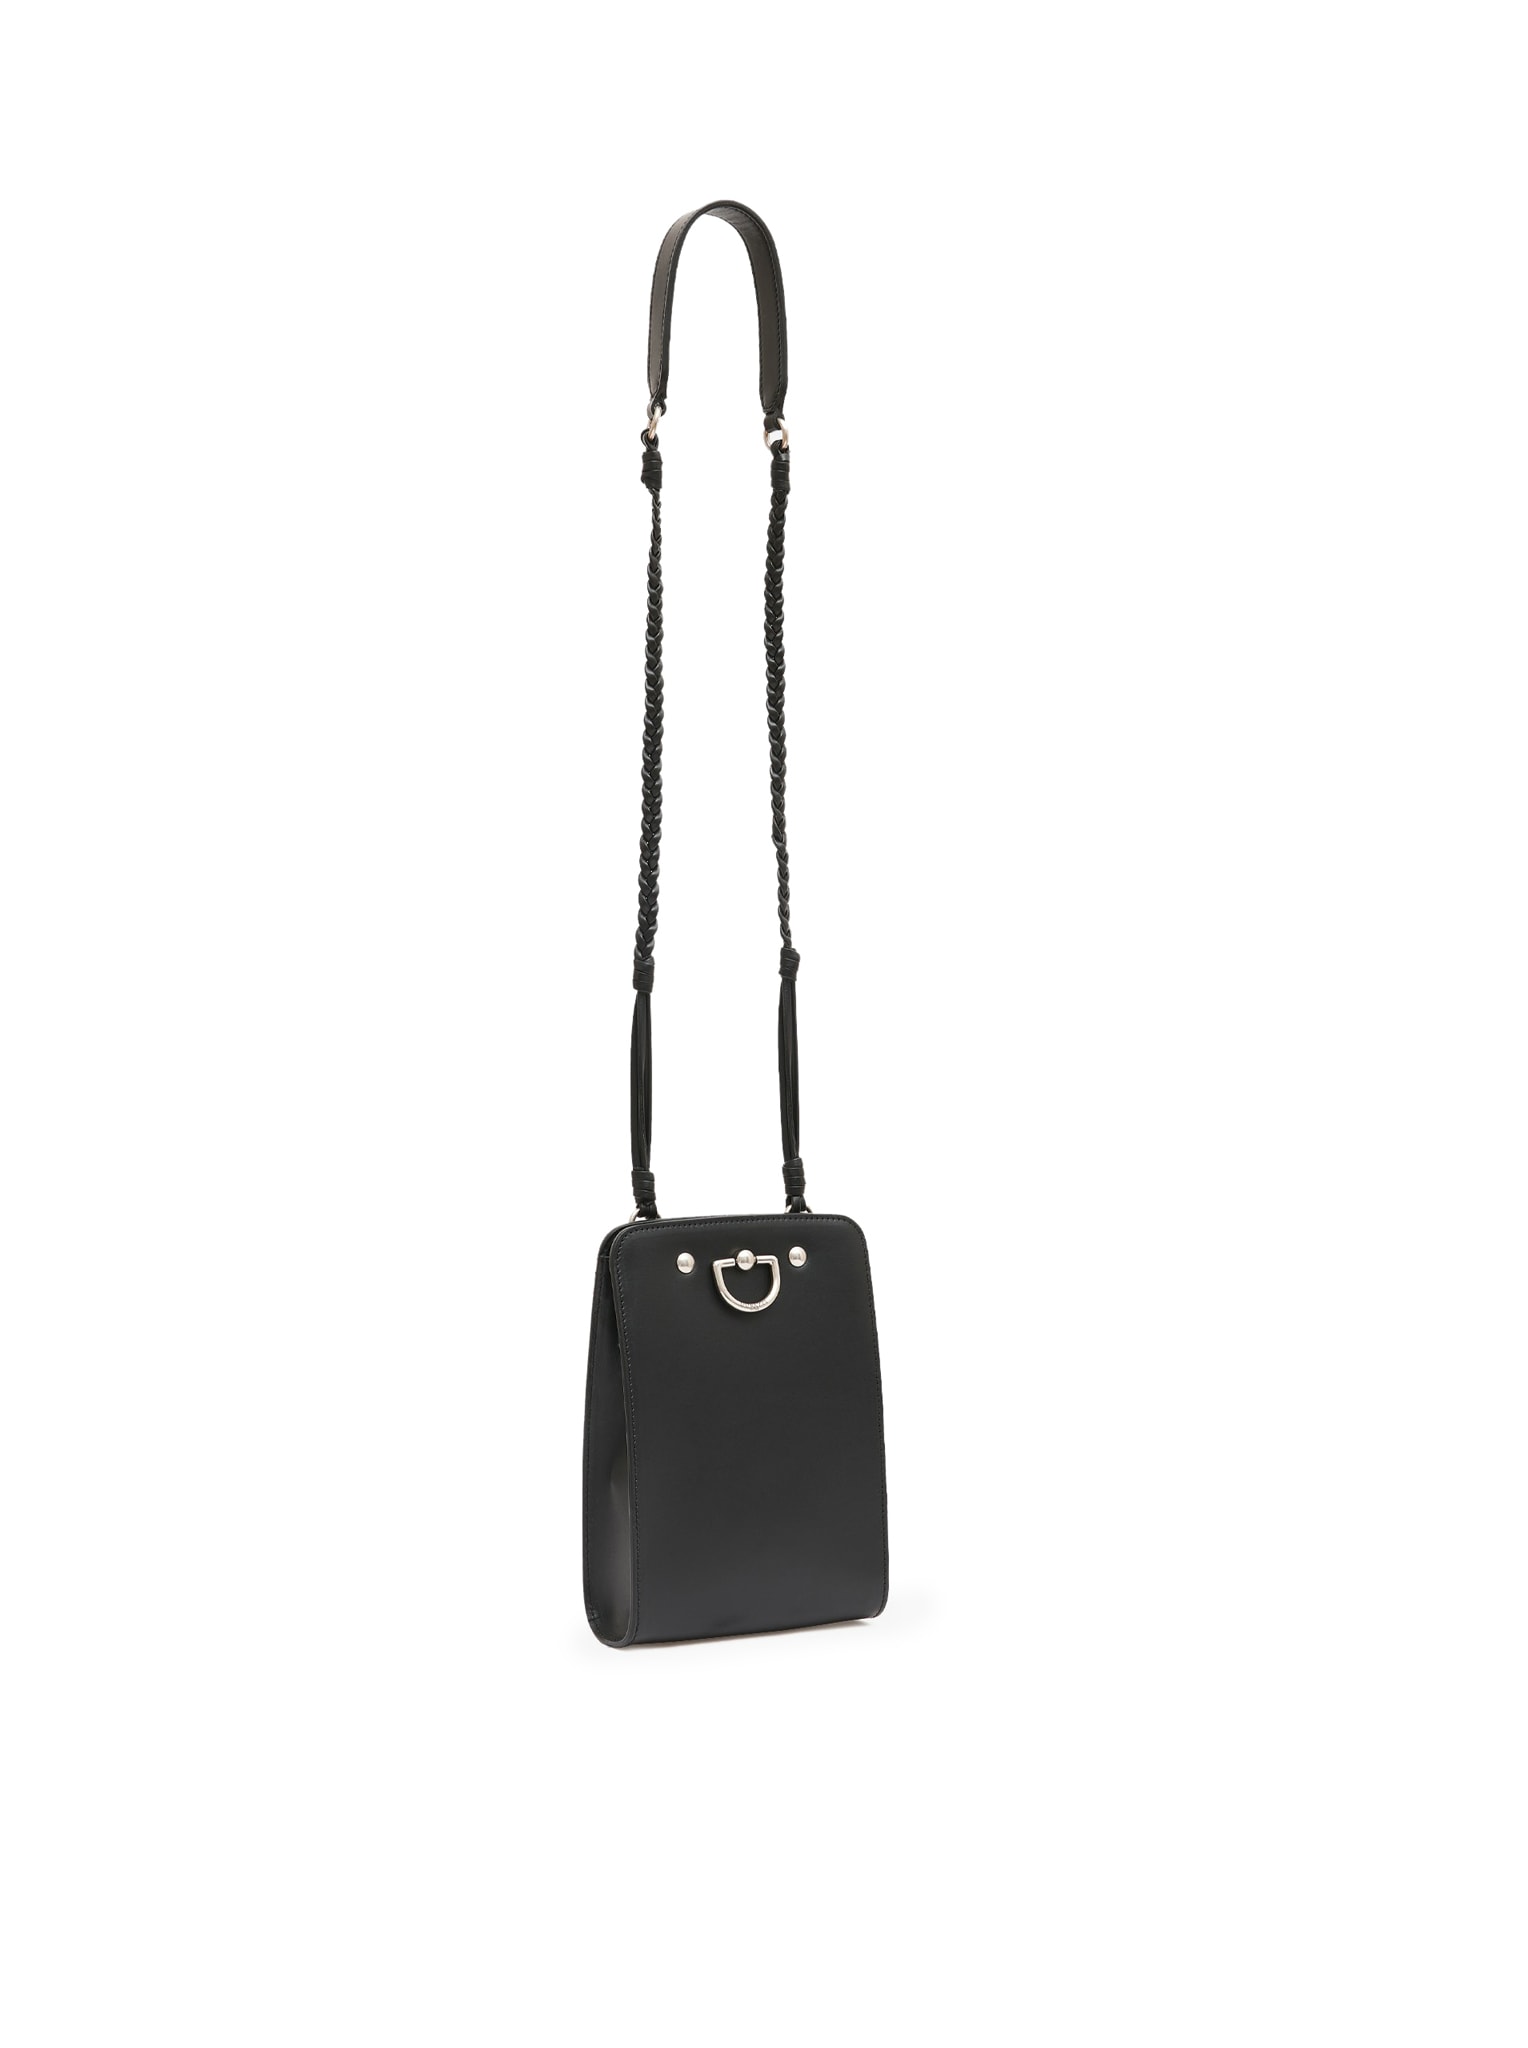 Shop Durazzi Milano Tile Bagcalfskin Leather With Branded D-ring In Black